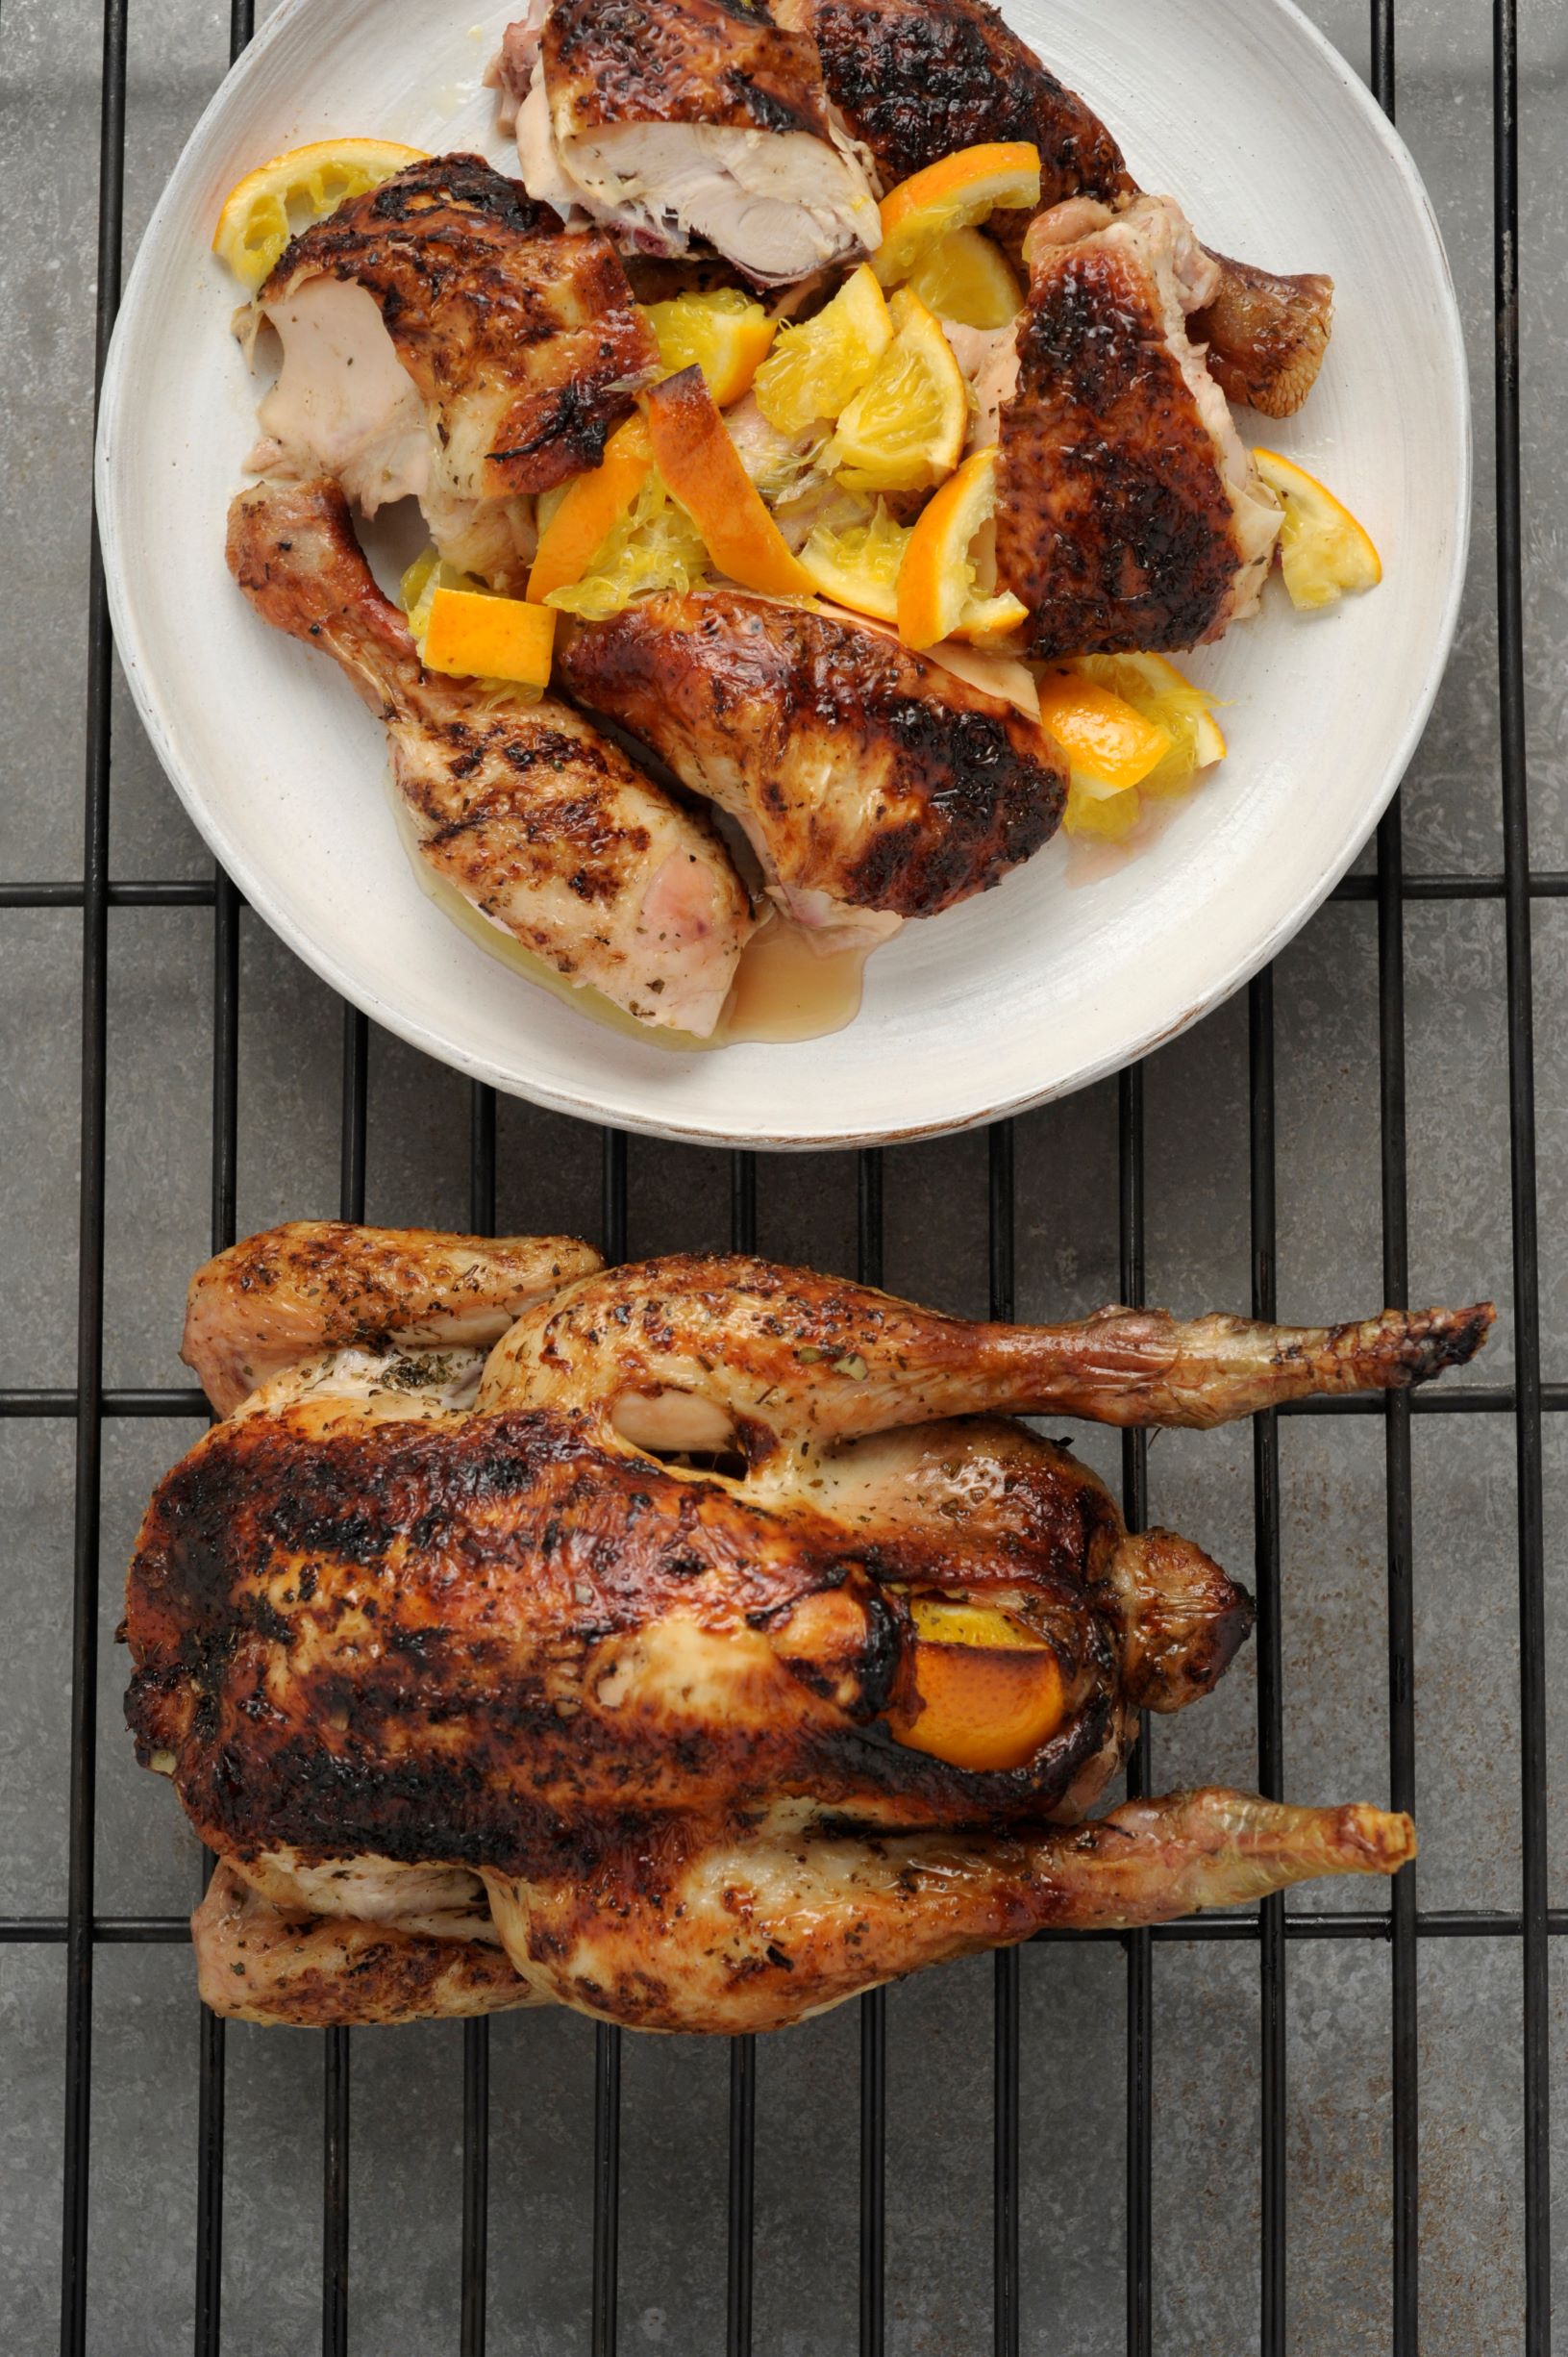 Charcoal-grilled chicken